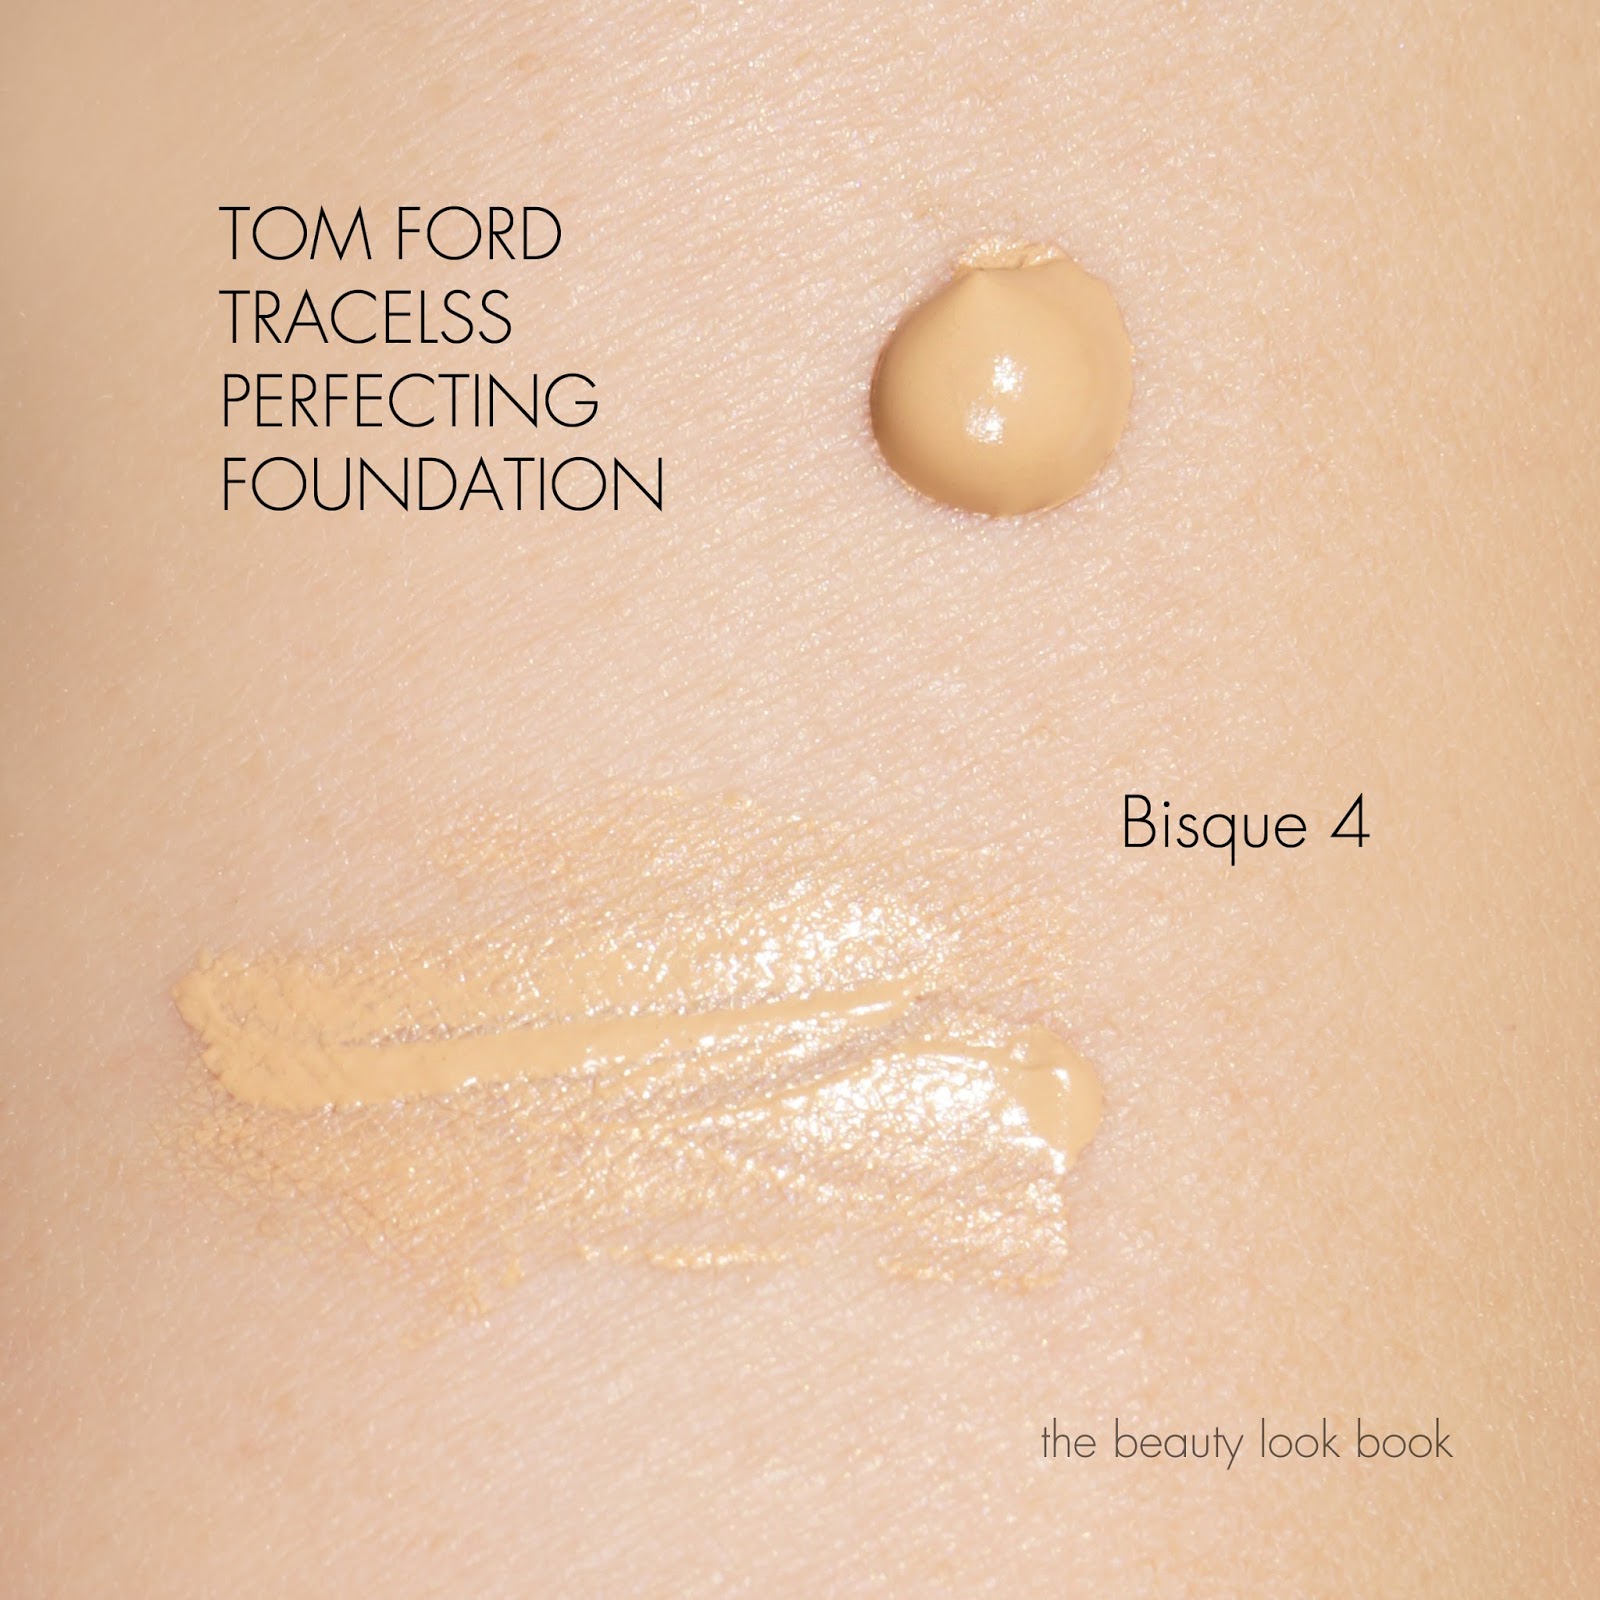 Tom Ford Traceless Perfecting Foundation Bisque 4 Review - The Beauty Look  Book